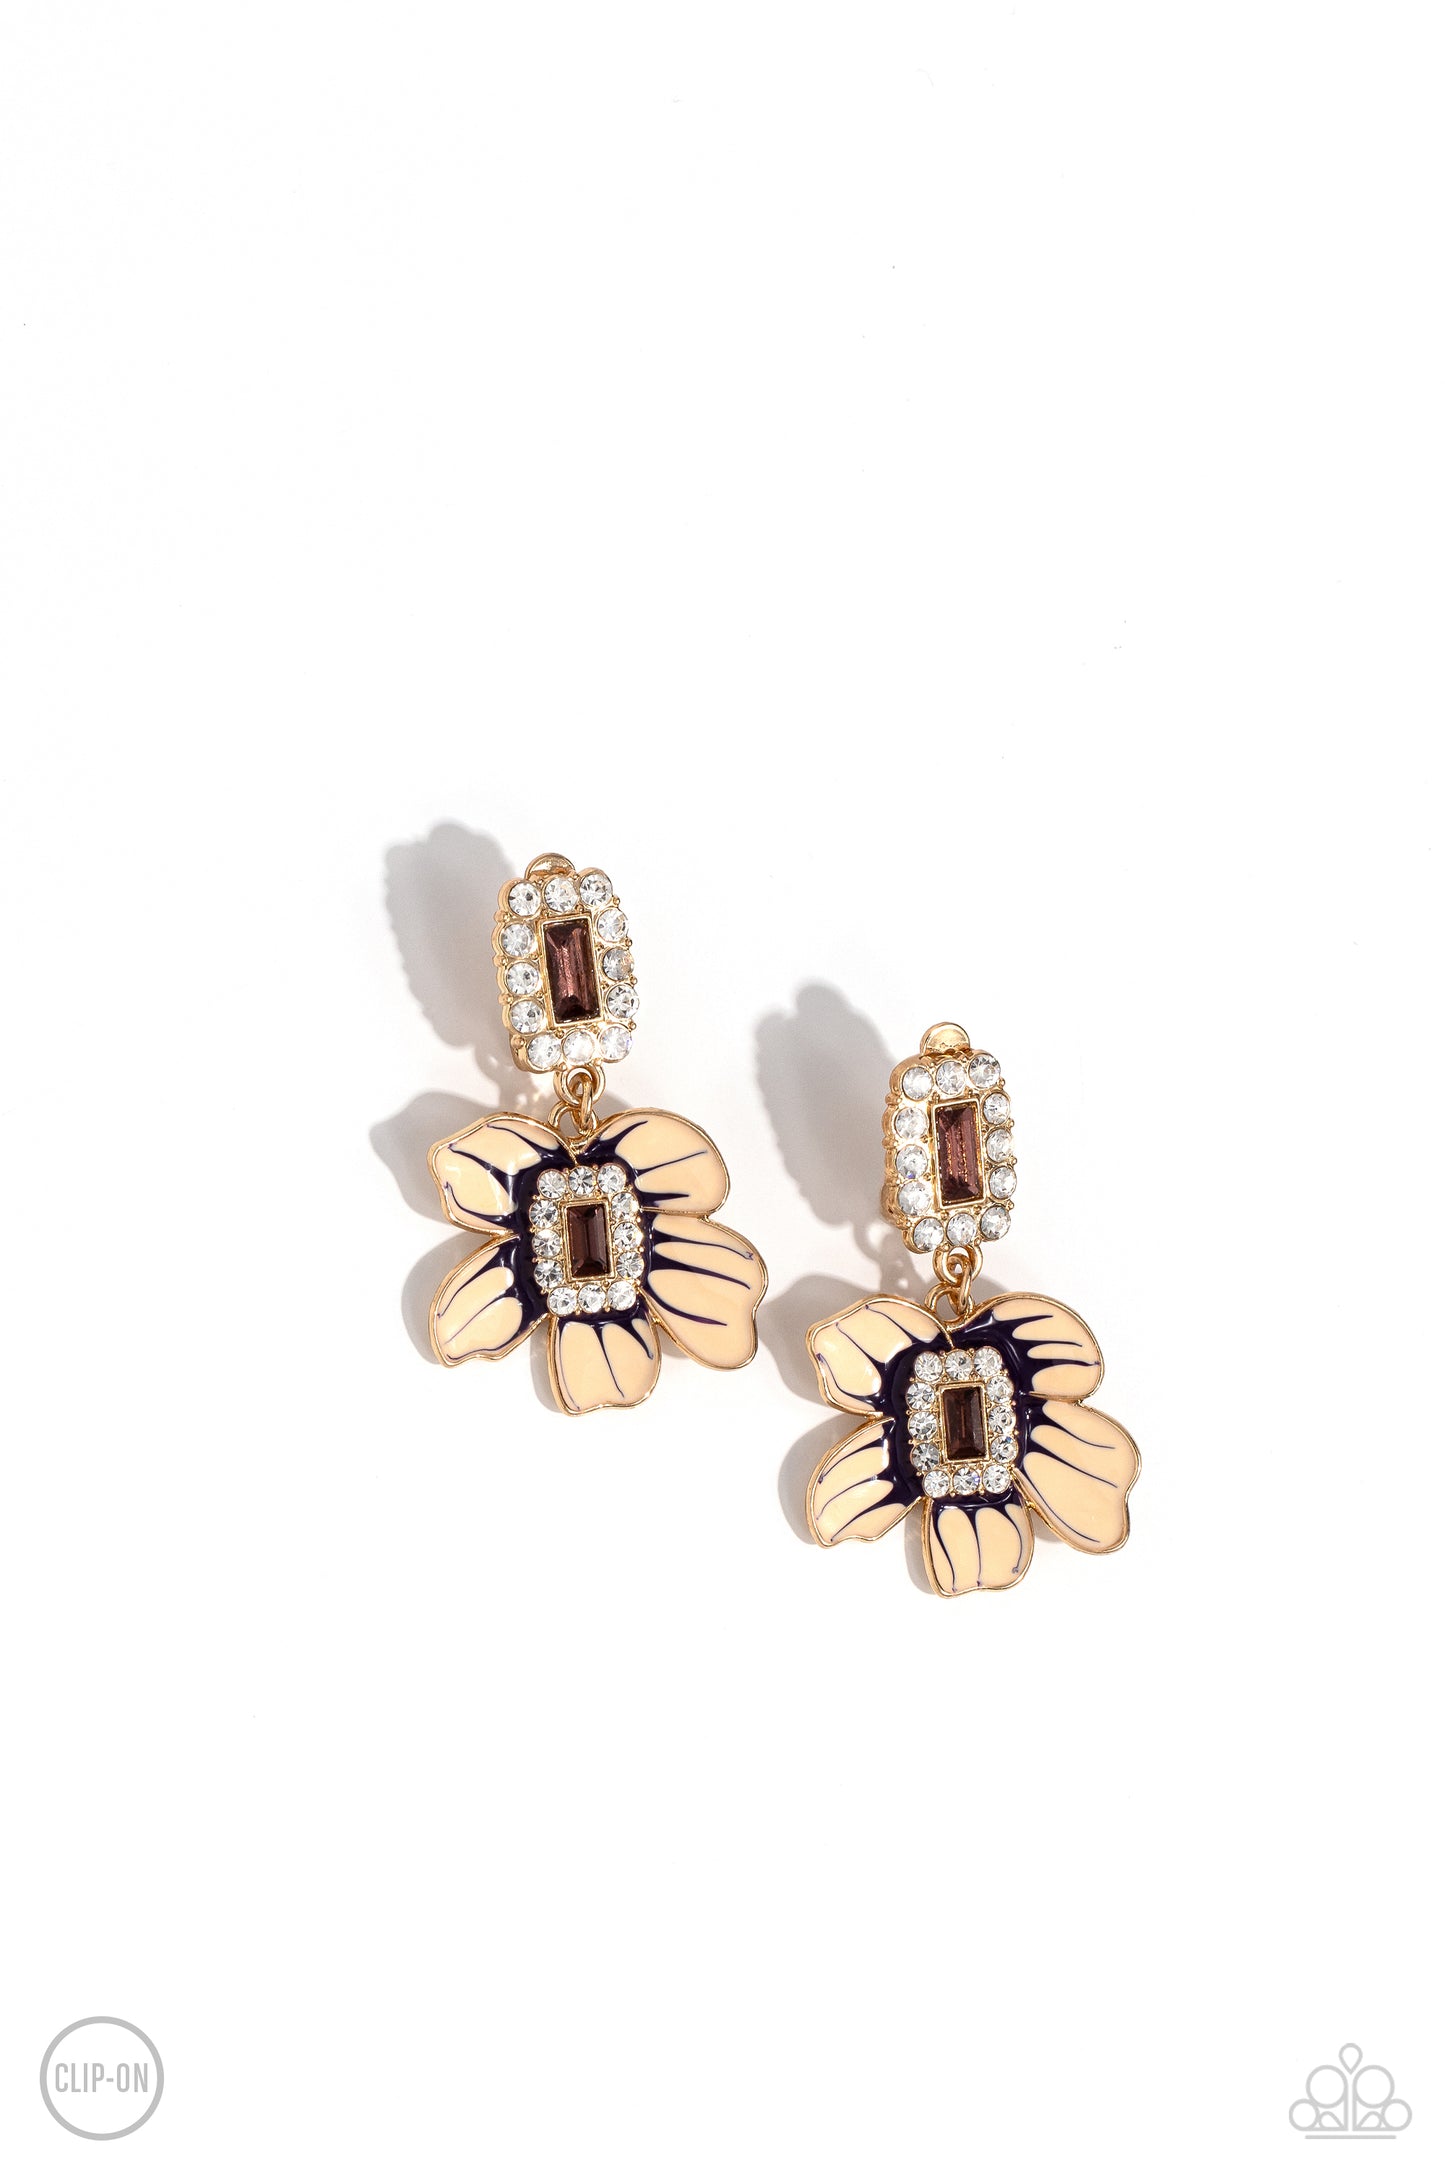 Colorful Clippings Gold Clip-On Earring - Paparazzi Accessories  Featuring an amethyst gem center, a Tender Peach, and plum-accented flower blooms from an emerald-cut gold fitting encrusted in a border of white rhinestones. The colorful flower is suspended from a similar emerald-cut glitzy pendant for a classic finish. Earring attaches to a standard clip-on fitting.  Sold as one pair of clip-on earrings.